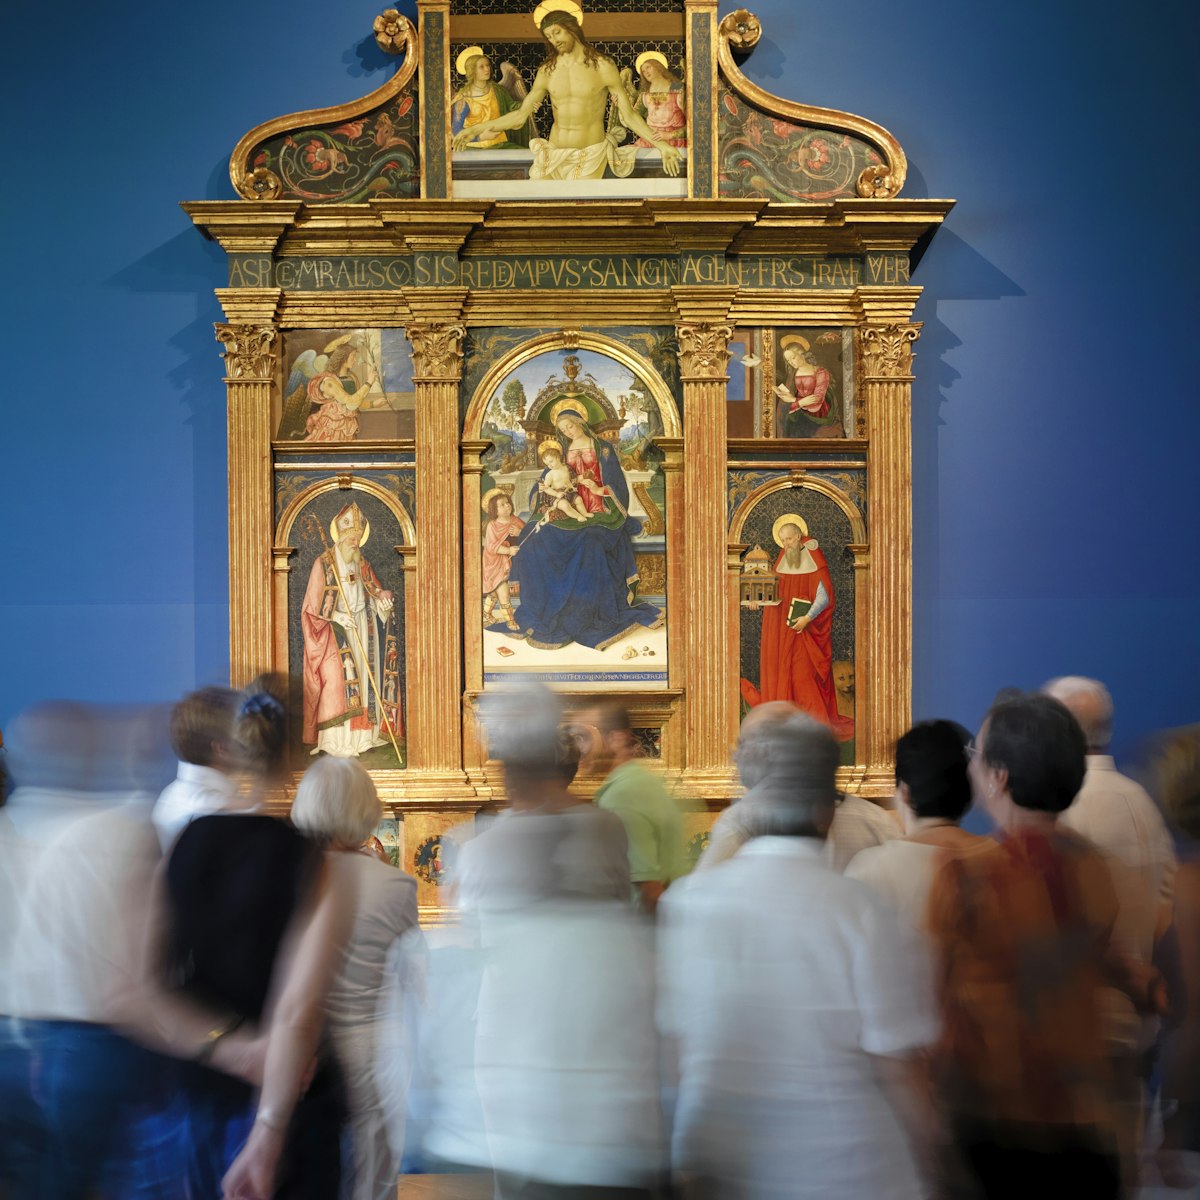 Tourist admire Pintoricchio's Pala di Santa Maria dei Fossi(1495)  in the National Gallery of Umbria.(Galleria Nazionale dell'Umbria). In the center of the multipaneled painting, the Madonna holds baby Jesus on her lap and a Pomergrante in the other hand.